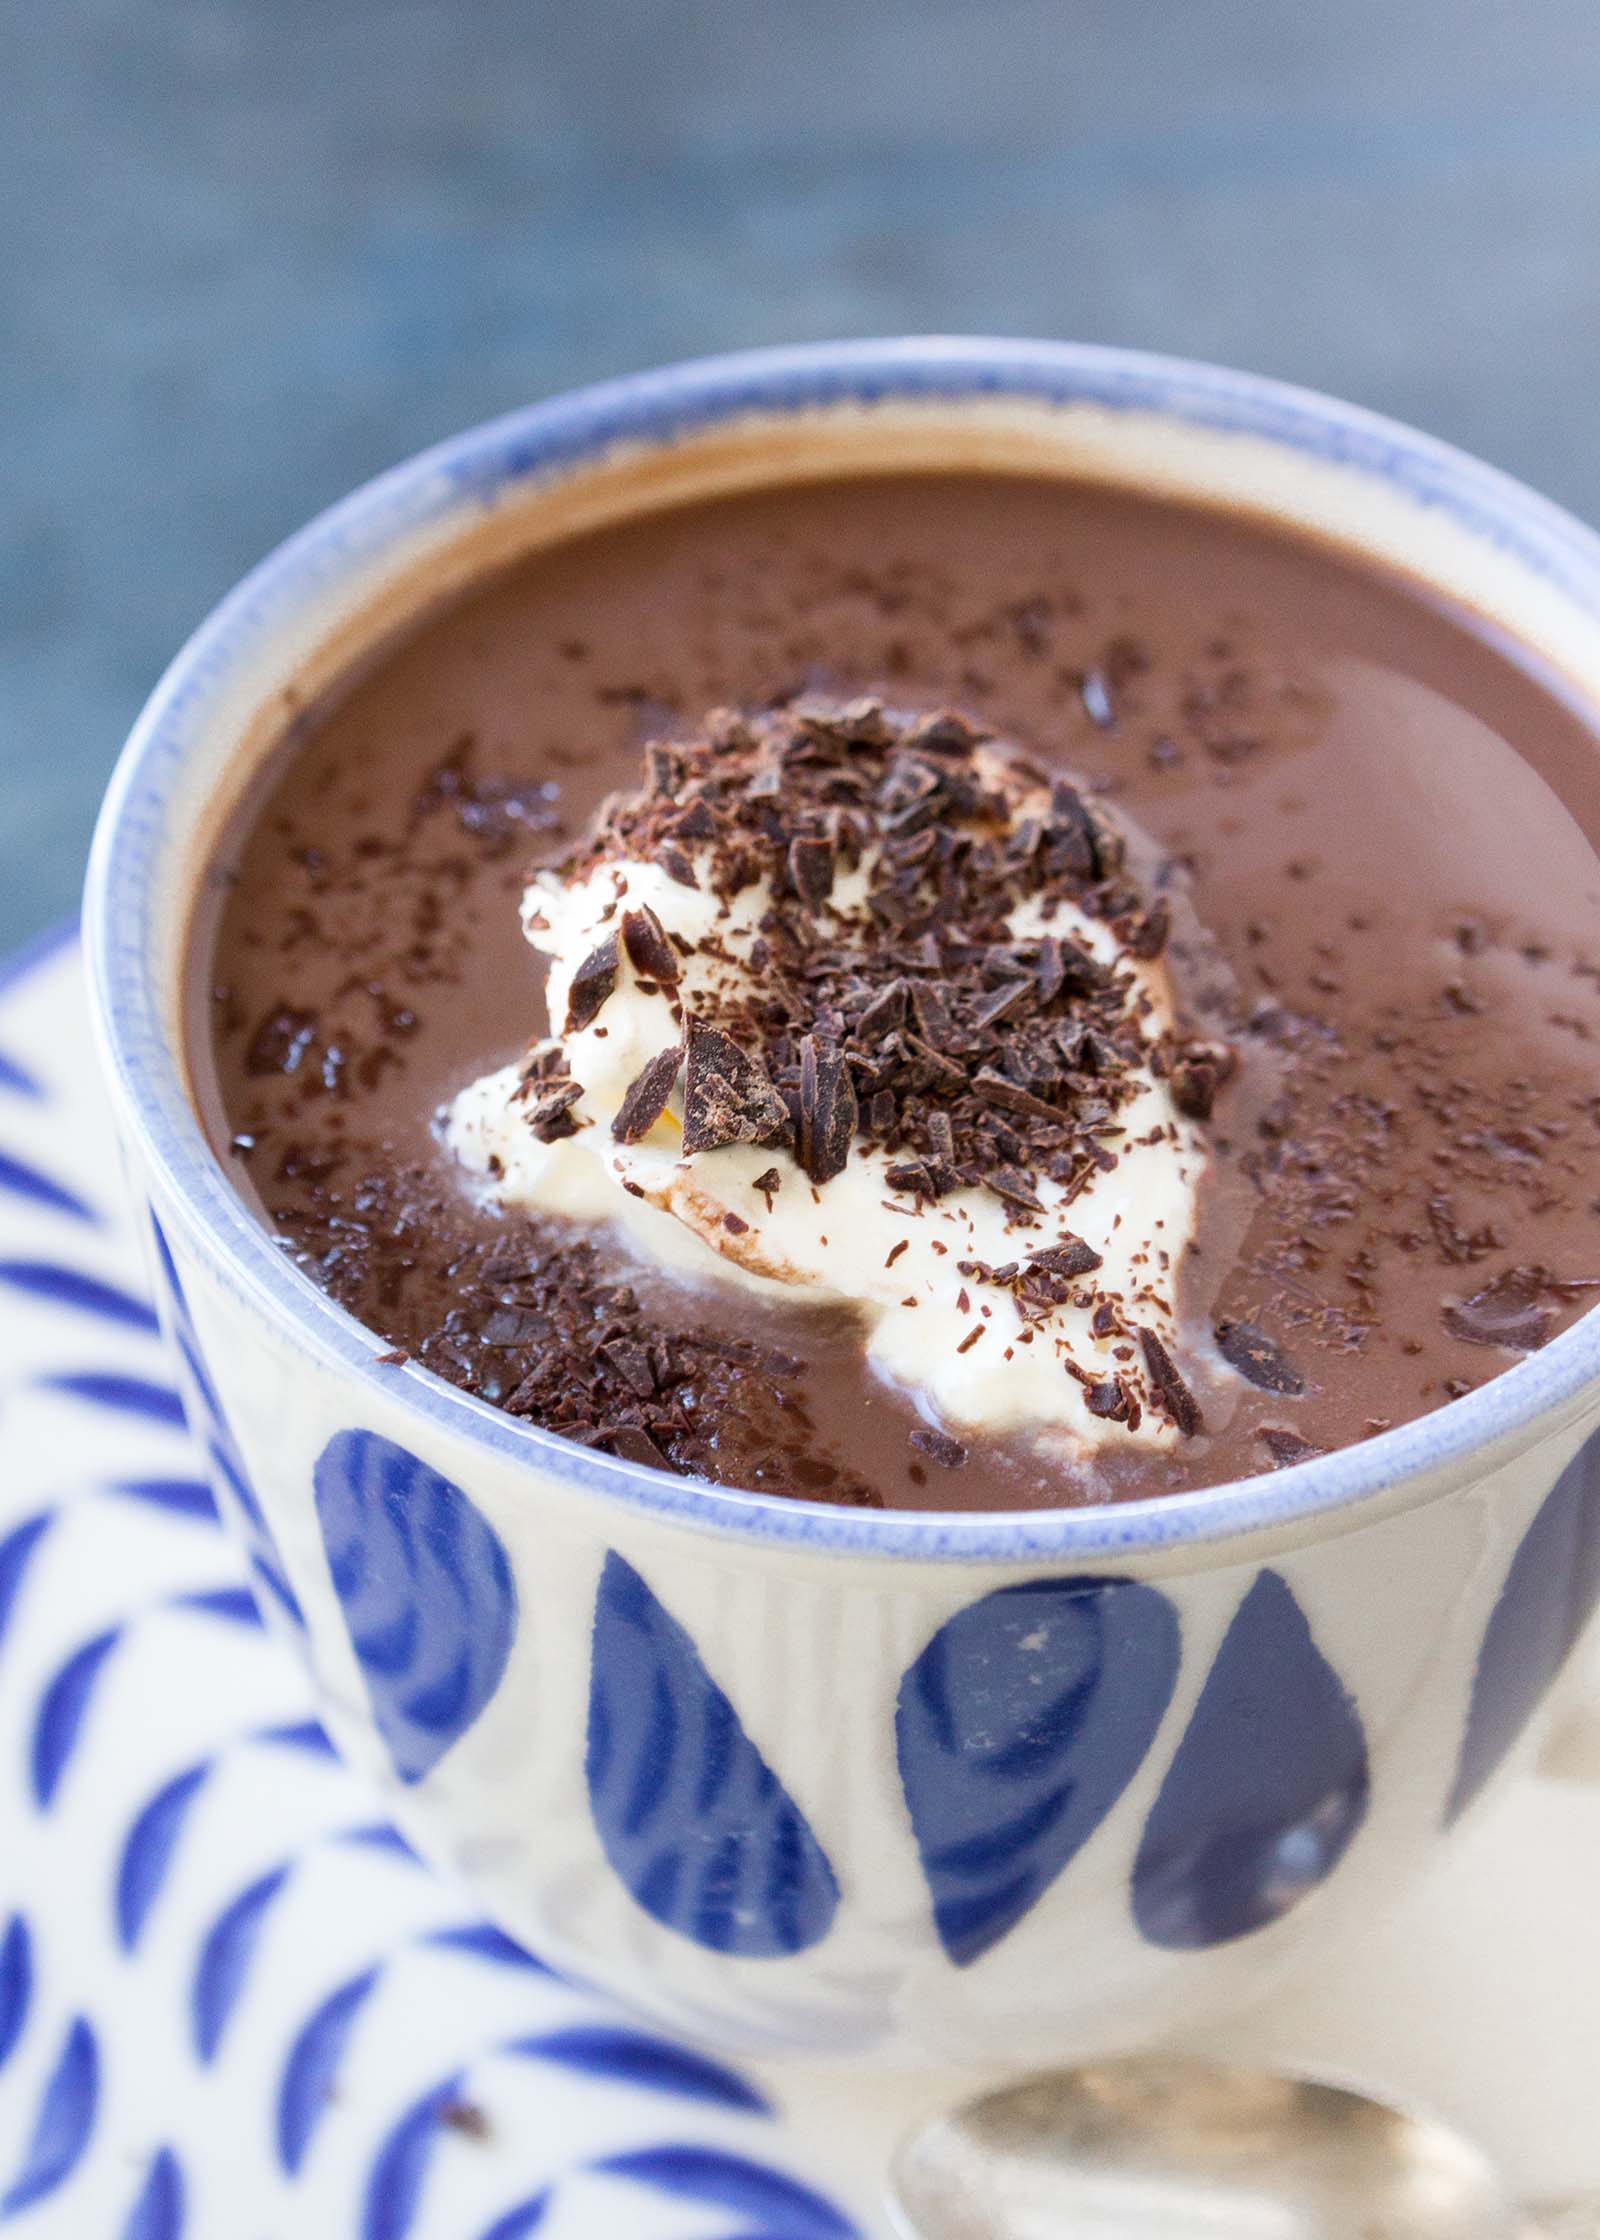 Free photo: Hot Chocolate Drink - Choc, Chocolate, Cup - Free Download ...